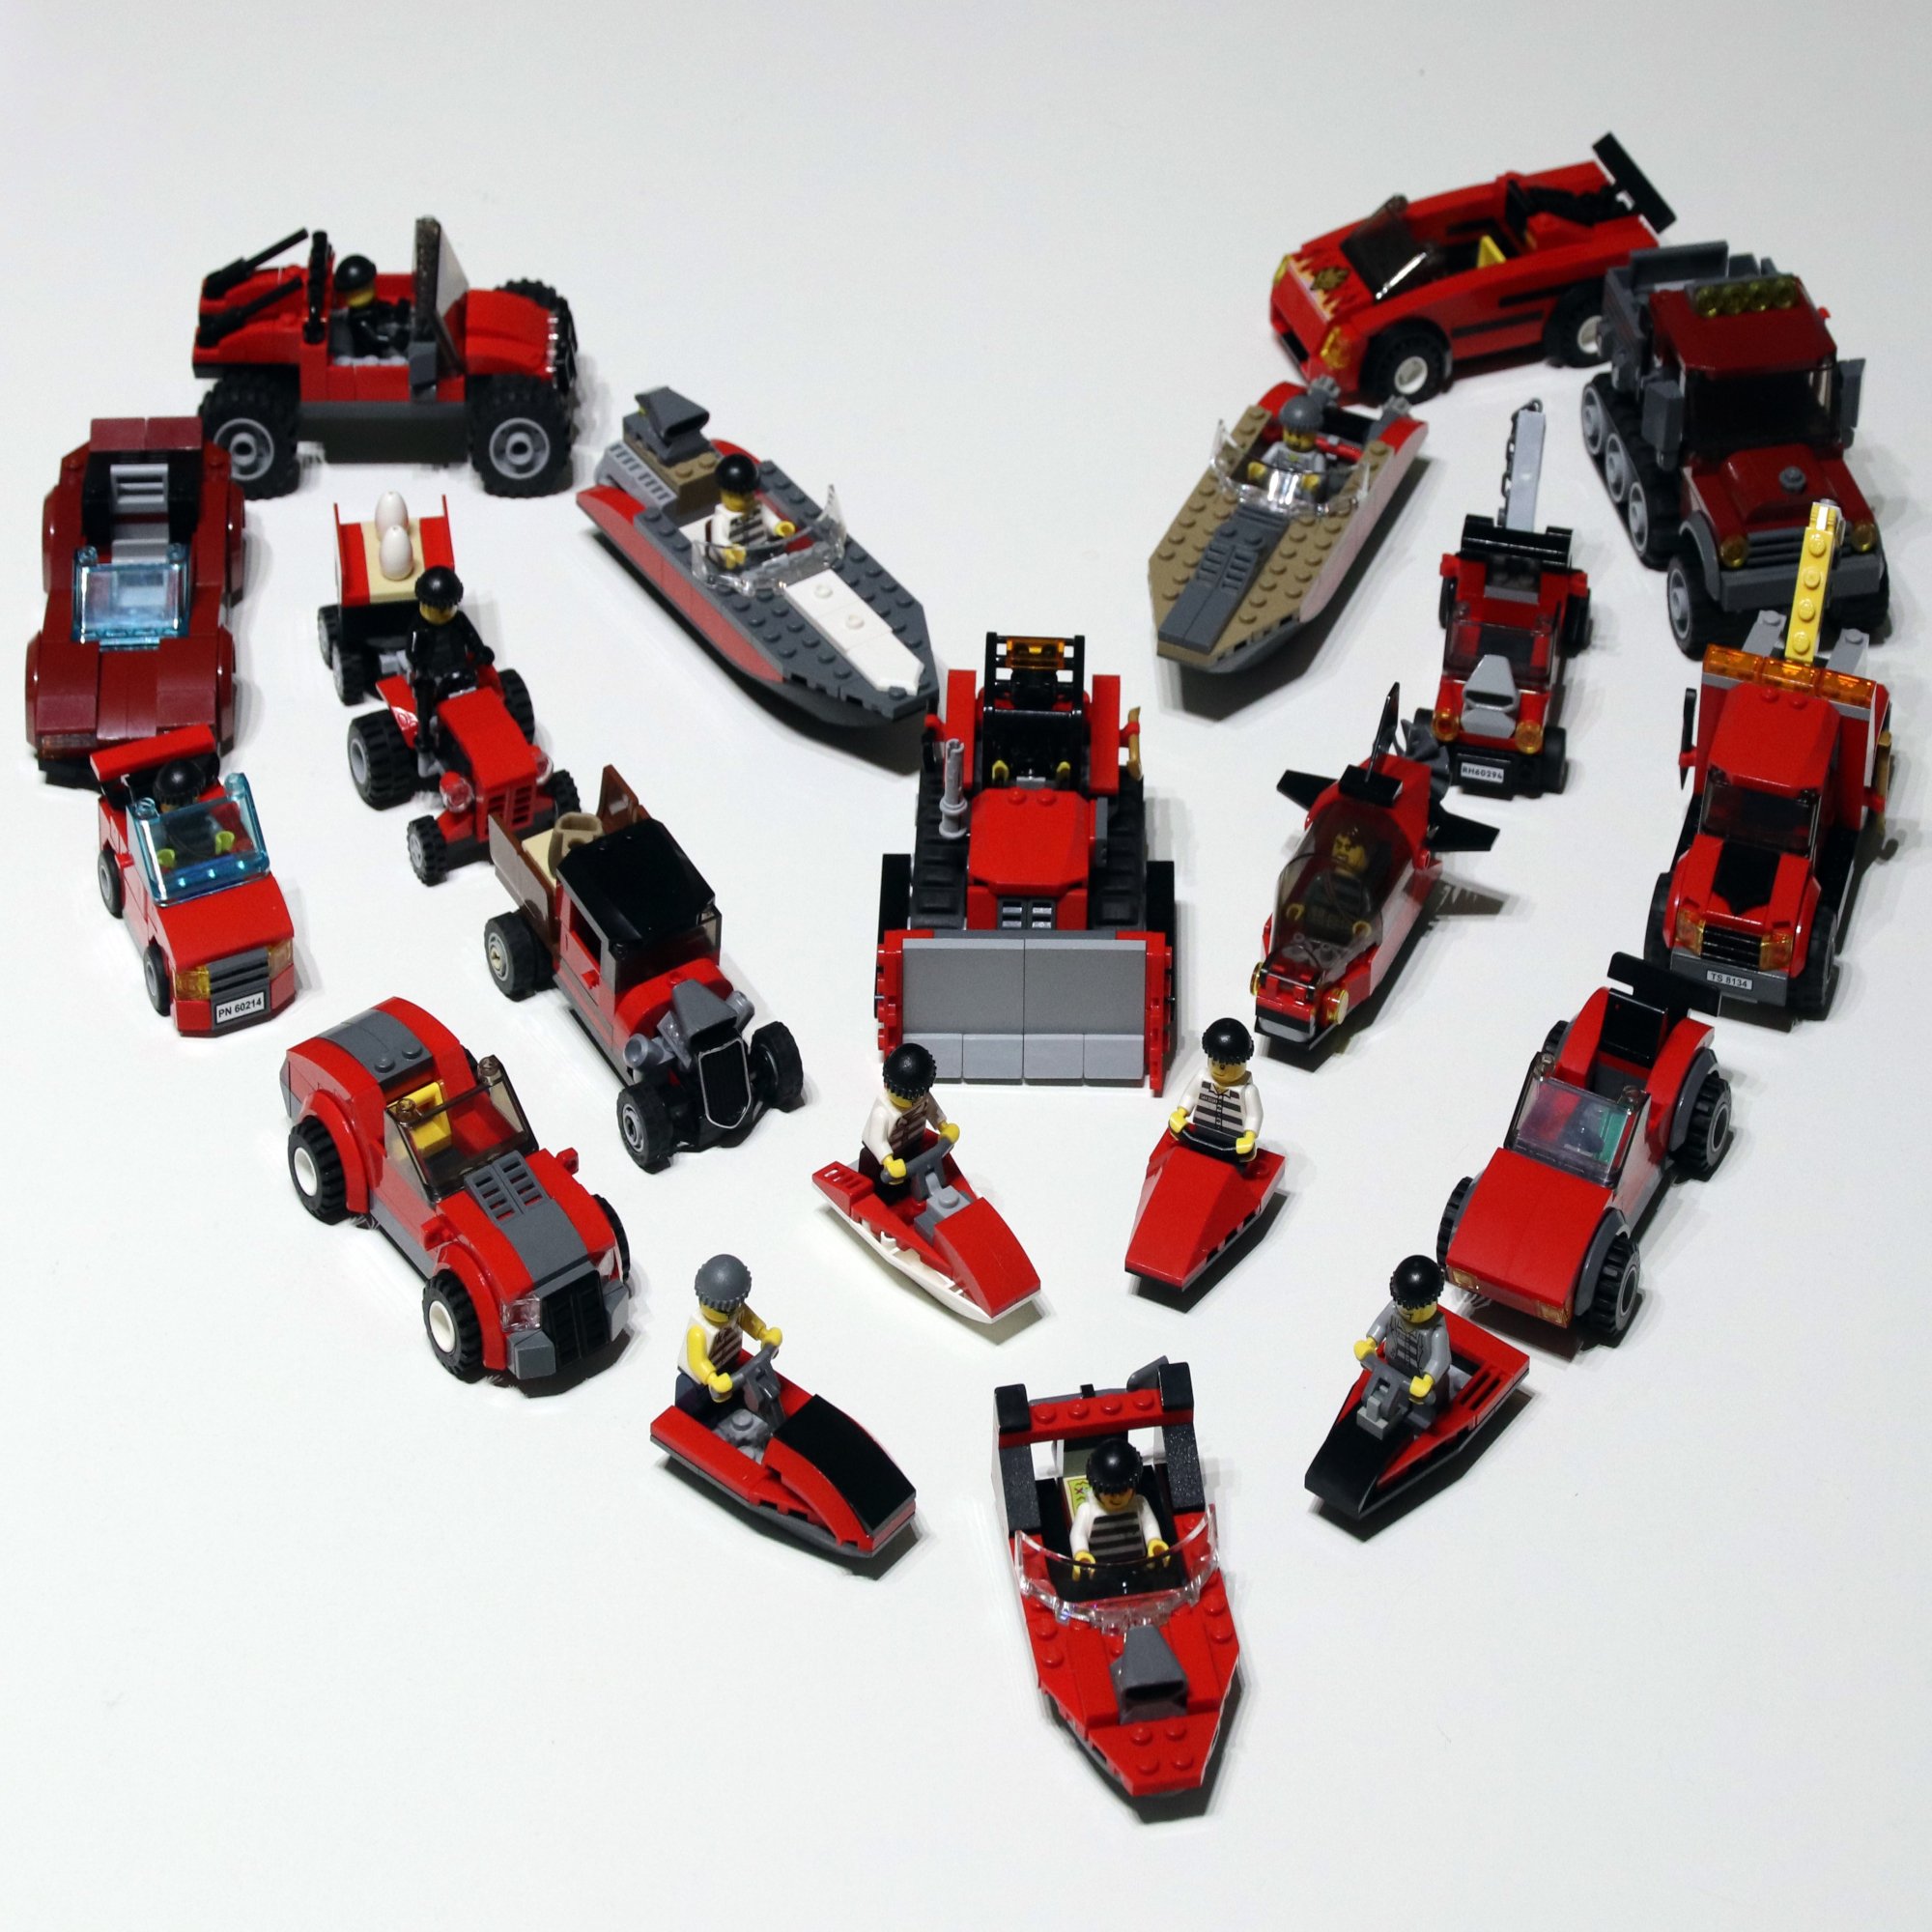 Afgang til finger attribut Bad Guys Love Red Cars: Analyzing the Villains' Vehicles in LEGO City -  BrickNerd - All things LEGO and the LEGO fan community